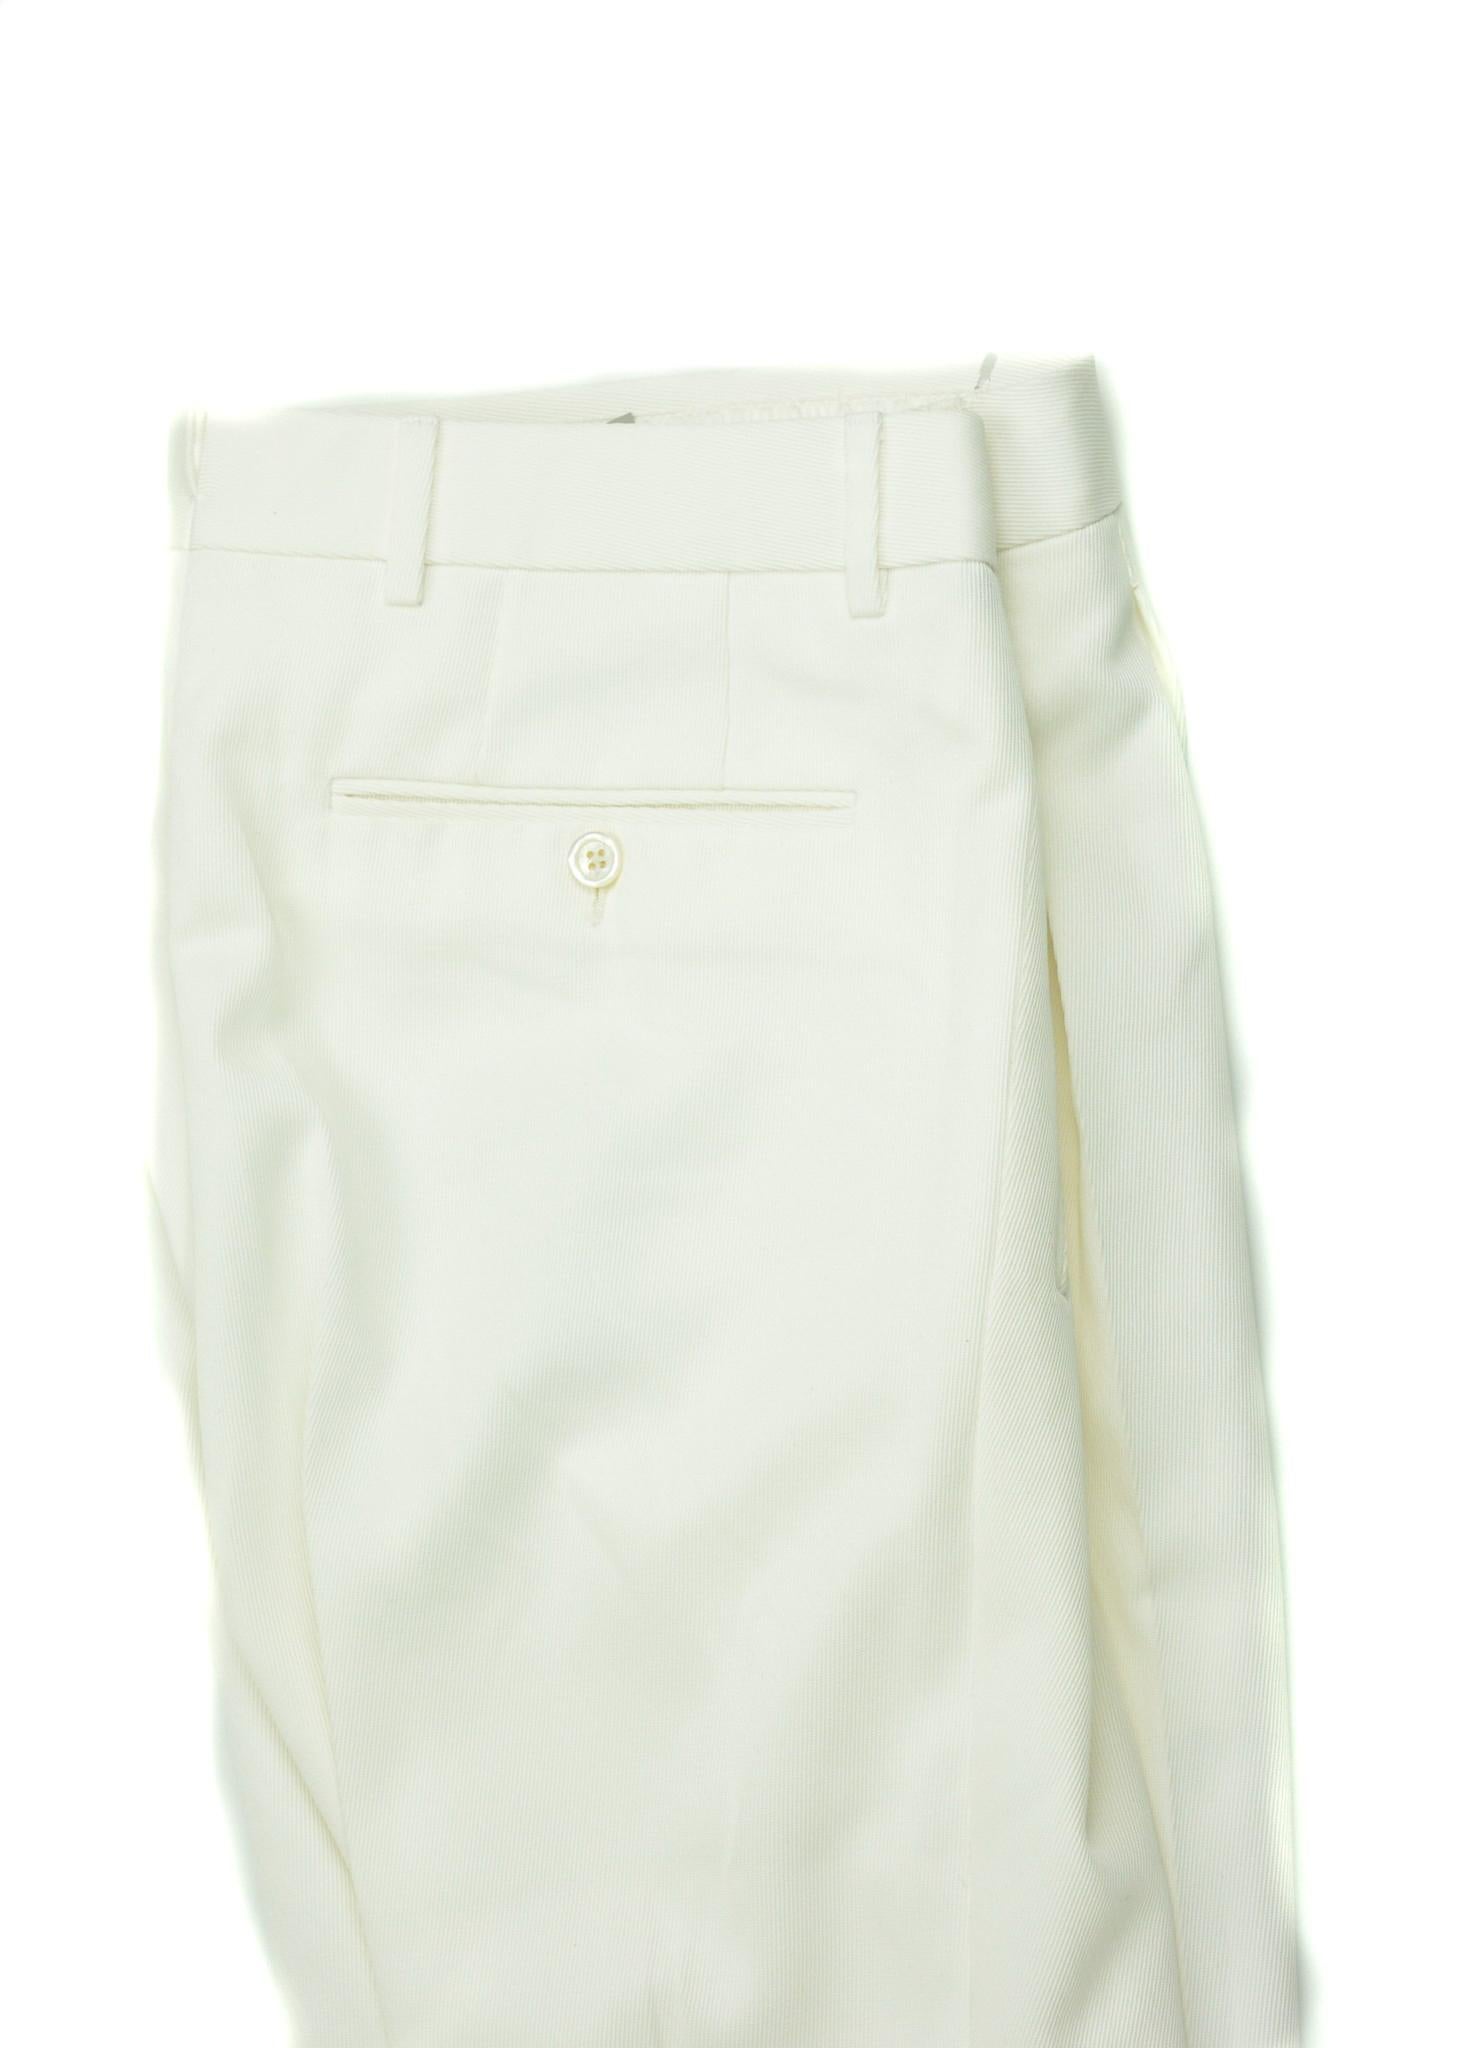 Tom Ford reintroduces the art of texture and subtle sophistication with these twill trousers. These expertly crafted pants feature the classic pleated front, high quality cotton blends, and luxe twill texture. You can pair these pants with a crisp